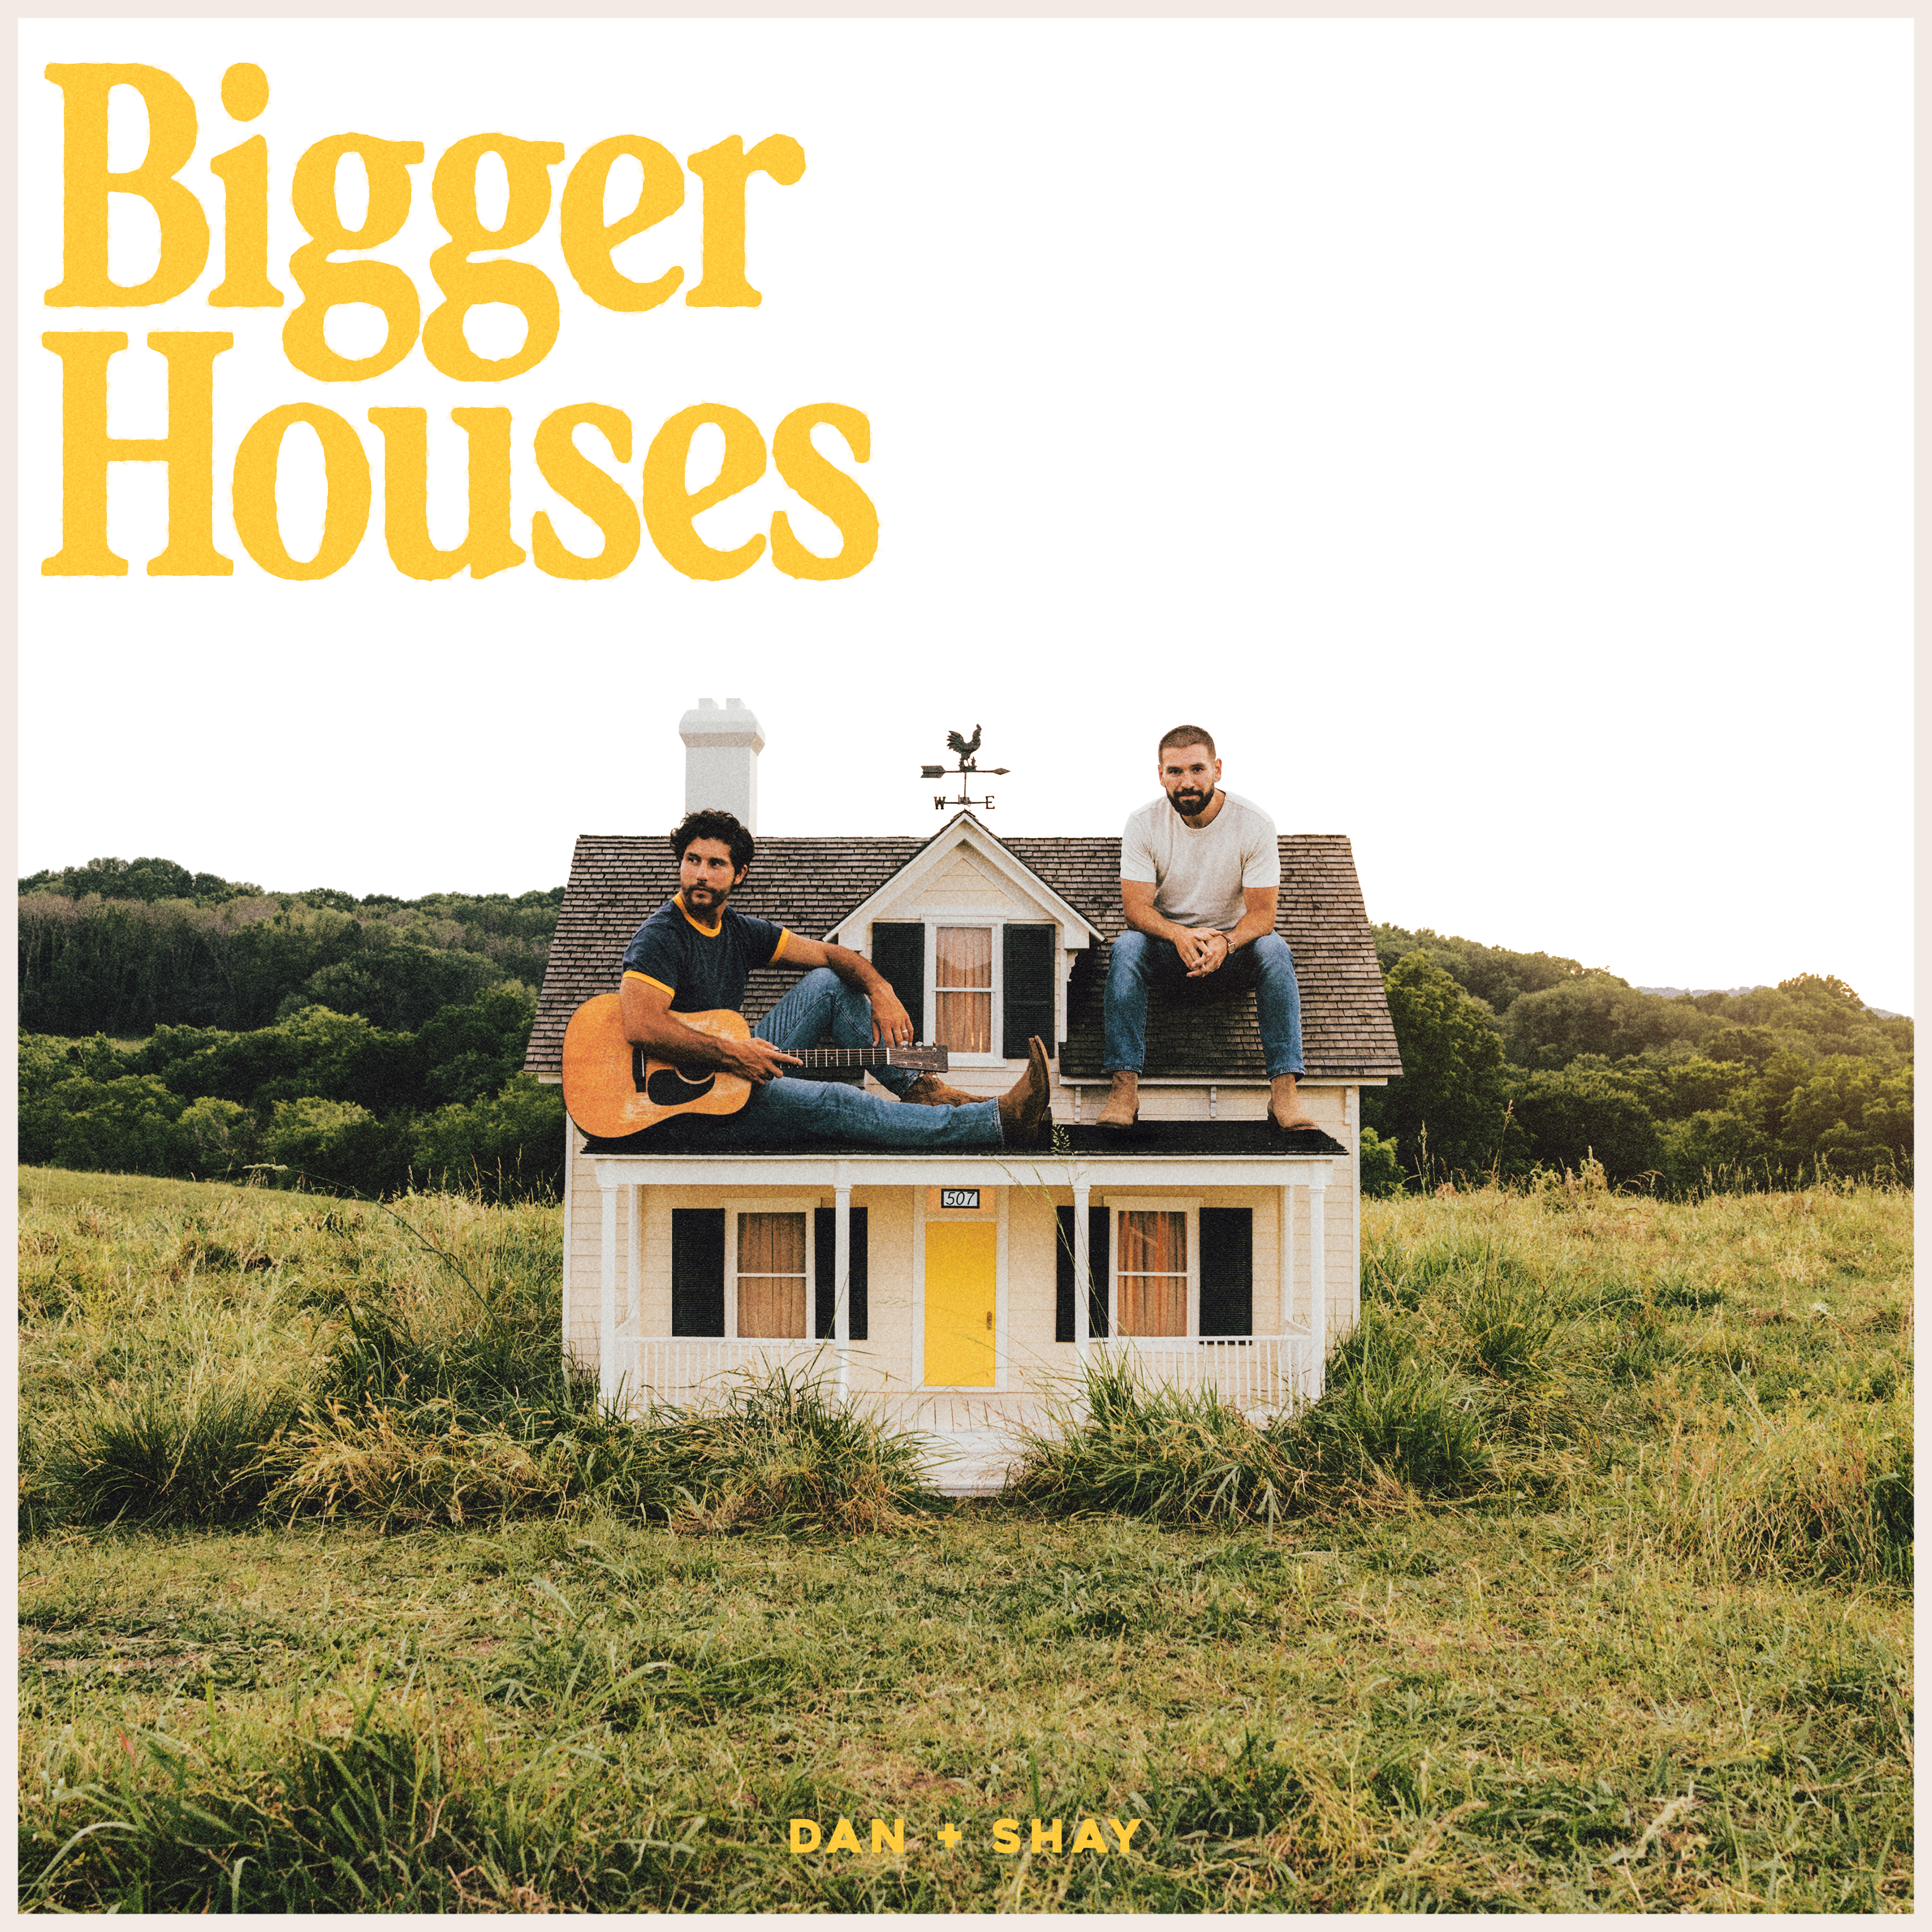 DAN + SHAY RELEASE HIGH-ENERGY “WE SHOULD GET MARRIED” FROM FORTHCOMING NEW ALBUM BIGGER HOUSES